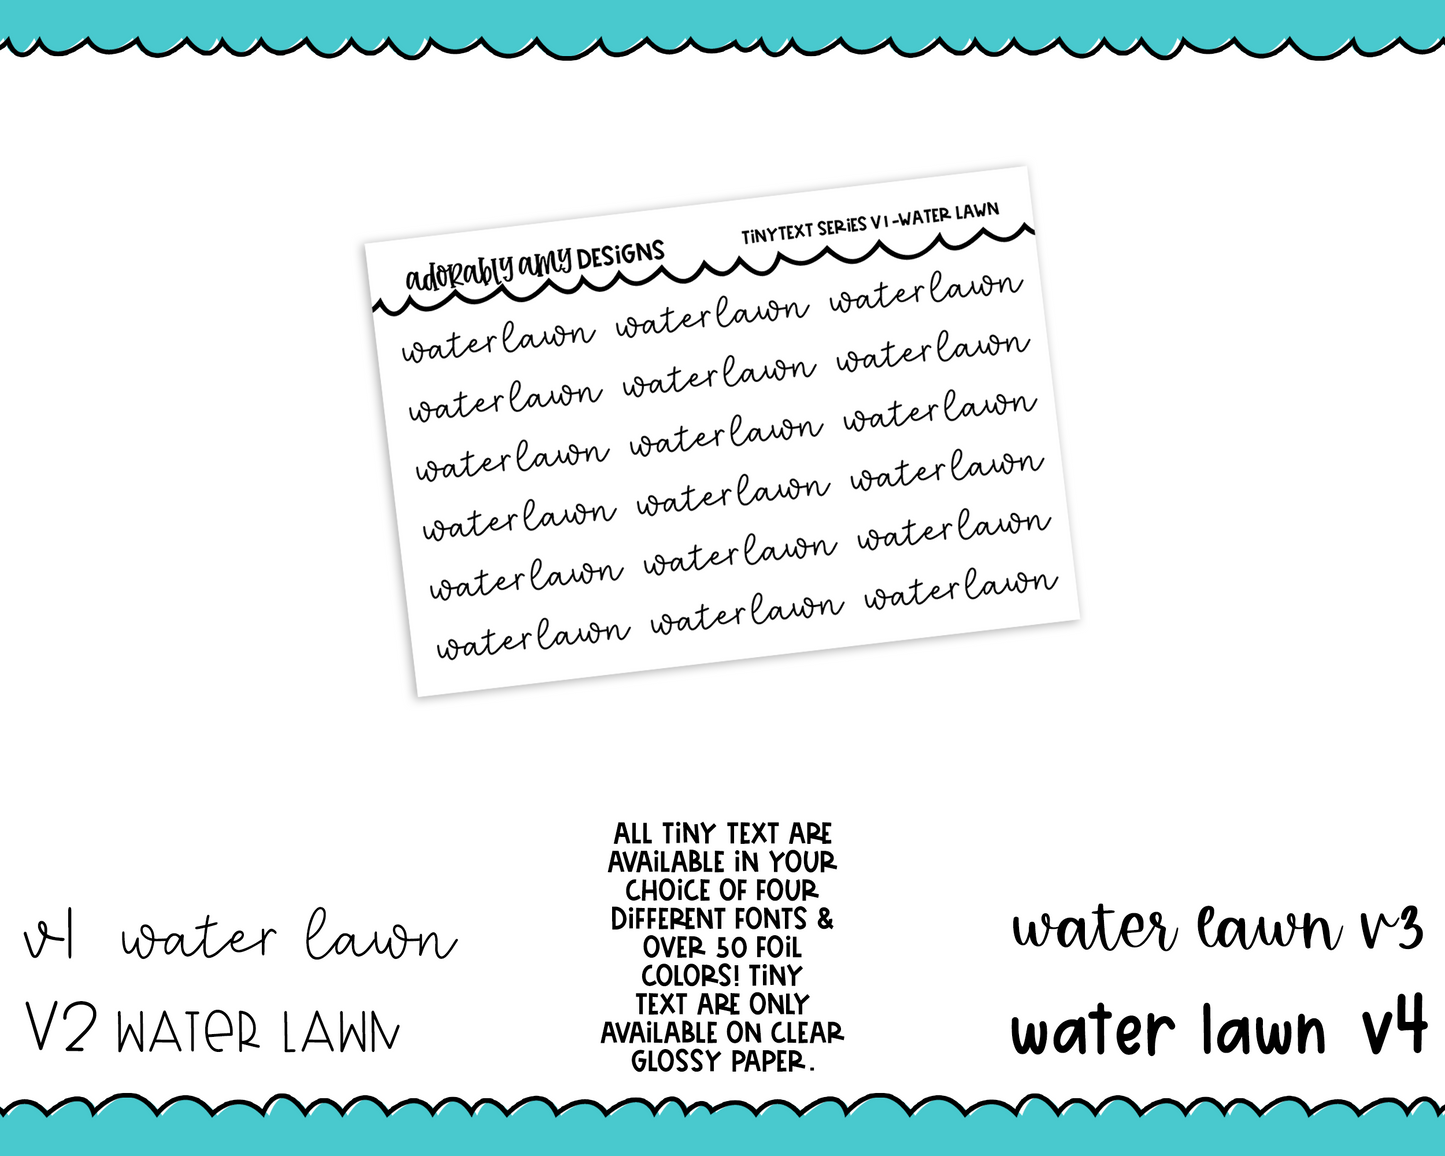 Foiled Tiny Text Series - Water Lawn Checklist Size Planner Stickers for any Planner or Insert